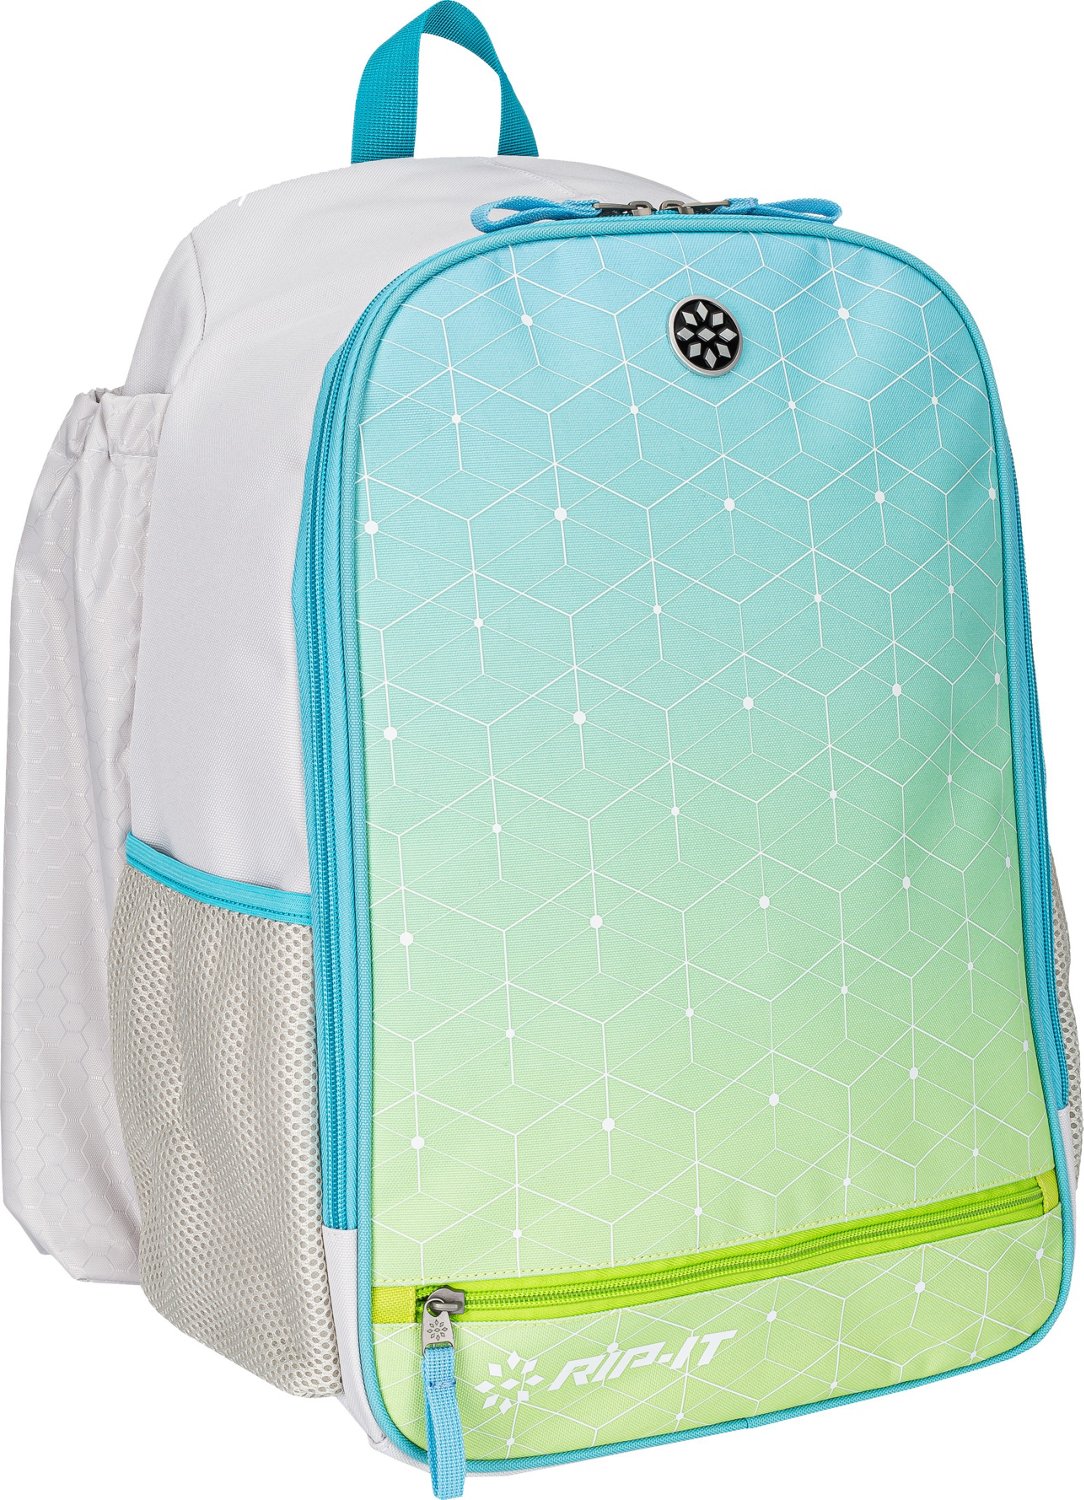 RIP-IT Classic 2.0 Softball Backpack | Free Shipping at Academy